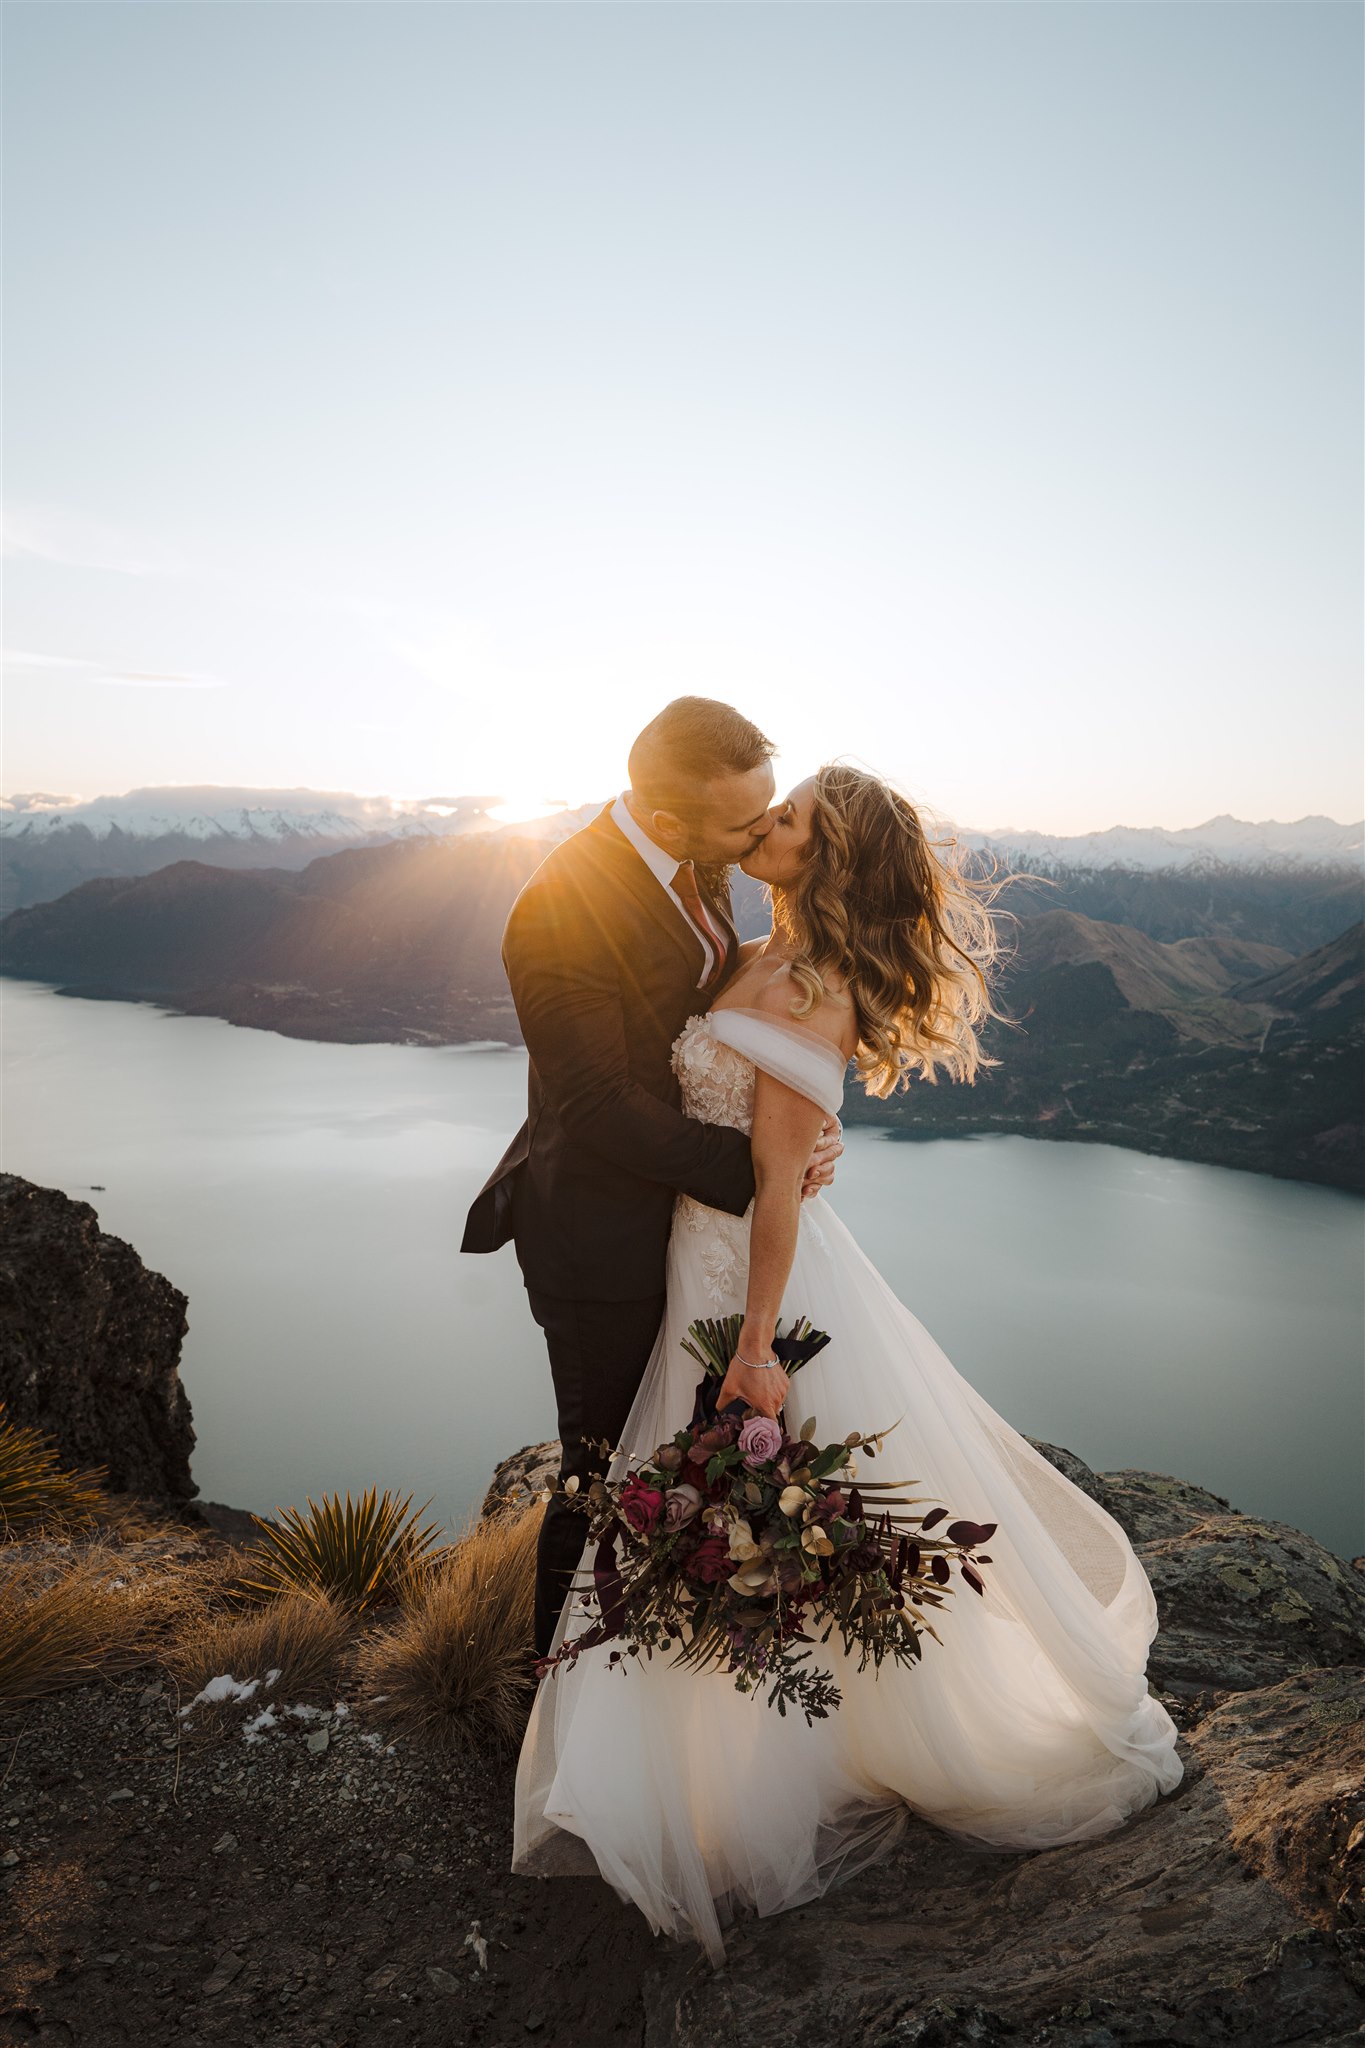 bride and groom kiss at sunset after wedding ceremony at Cecil Peak in Queenstown, nNew Zealand